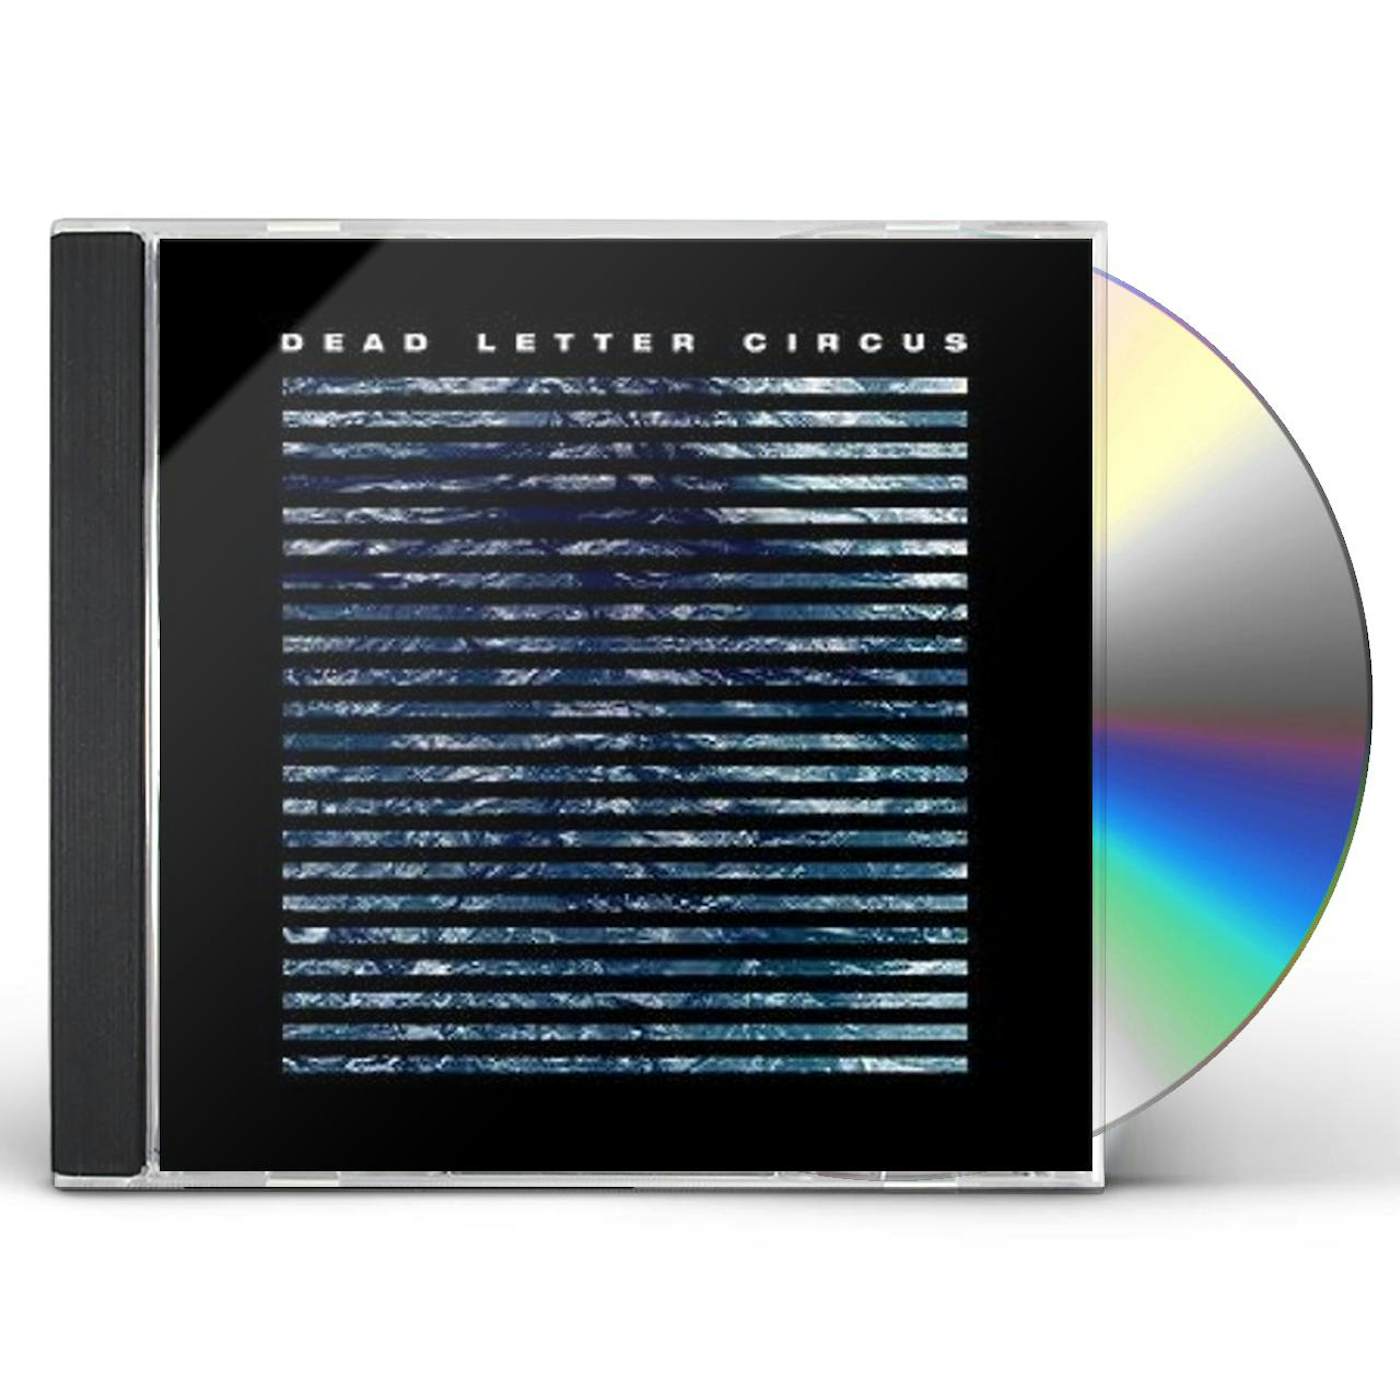 DEAD LETTER CIRCUS CD